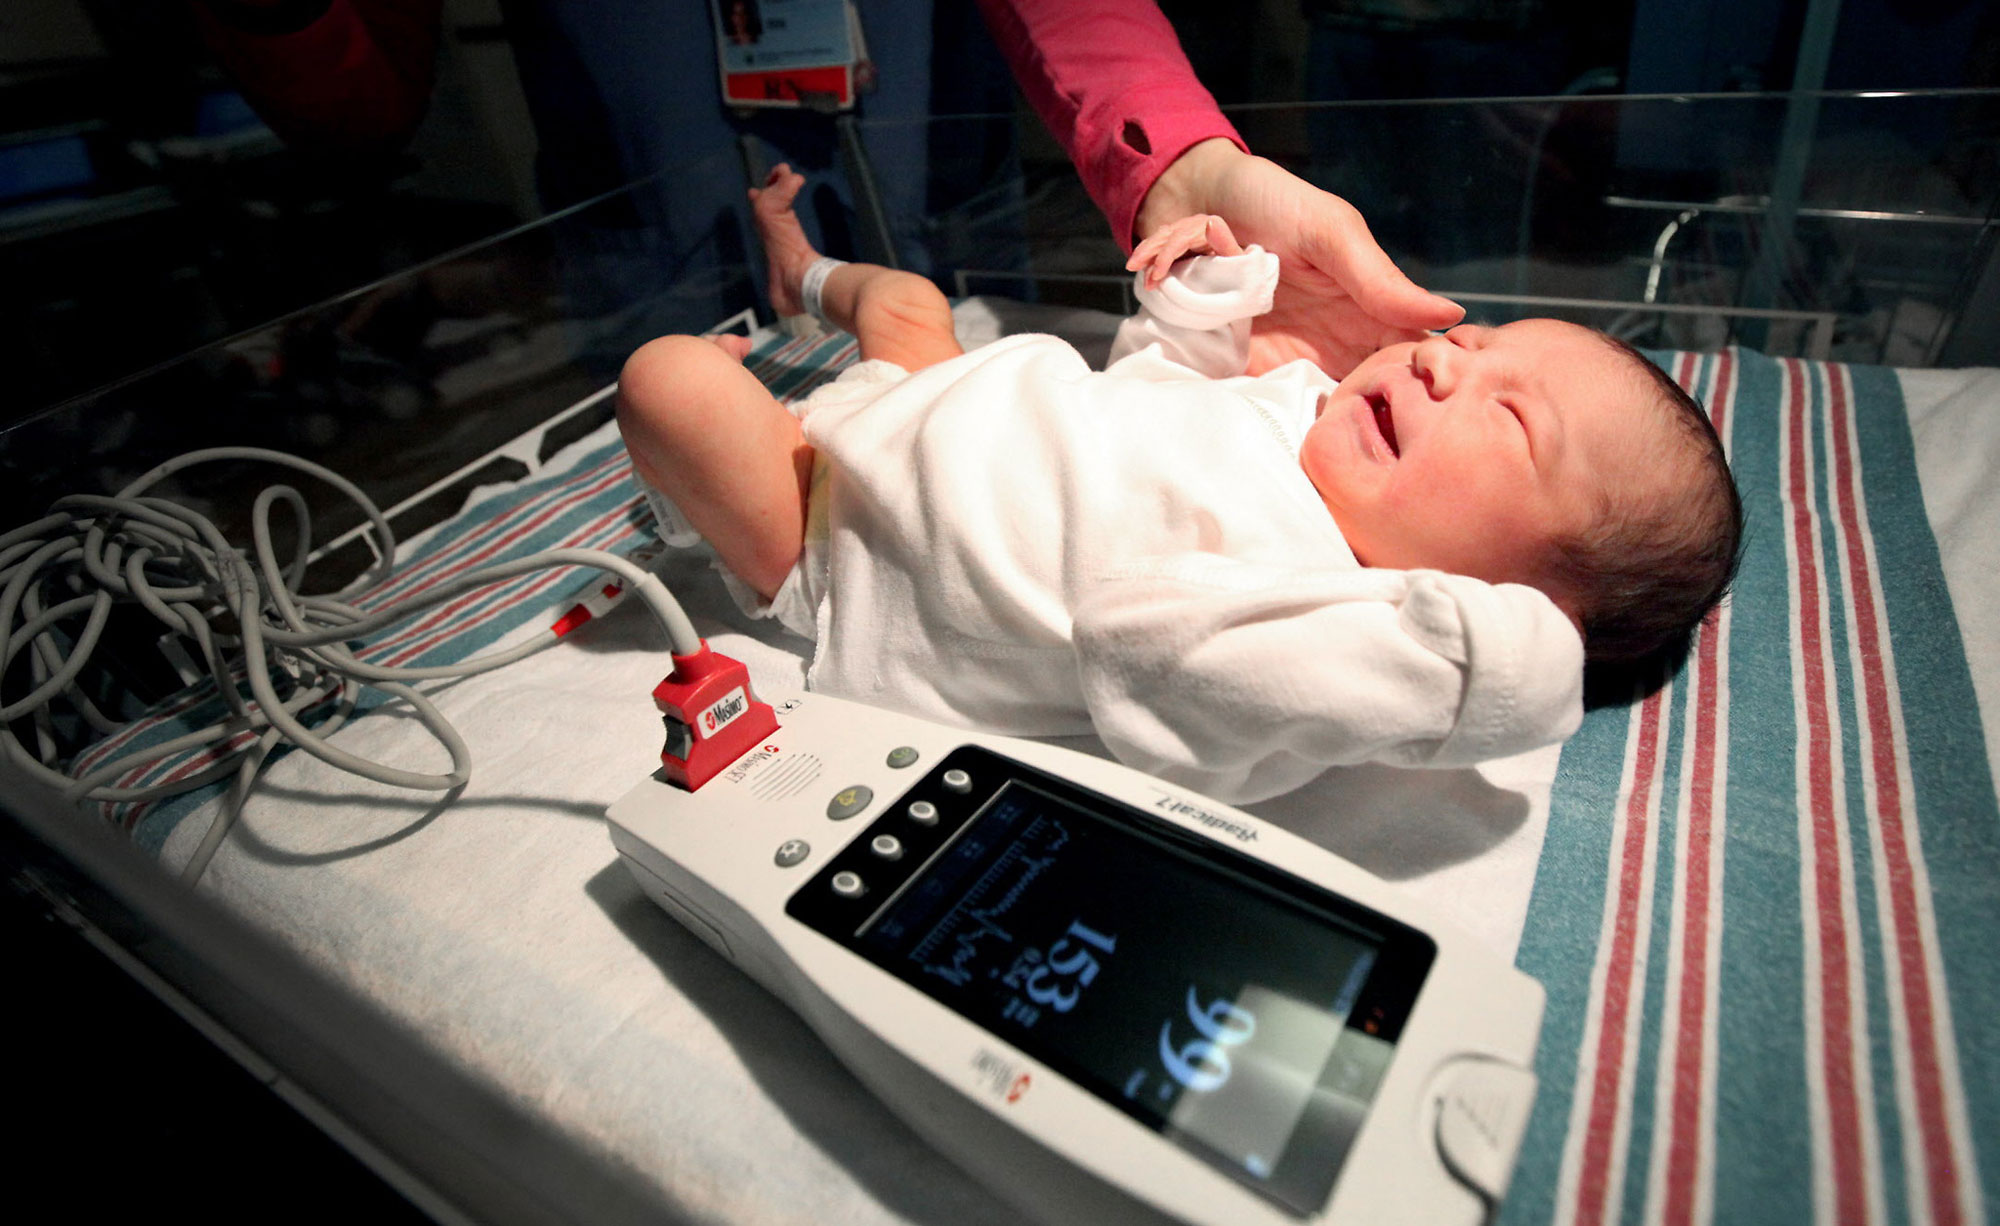 Detecting Congenital Heart Defects After Home Birth